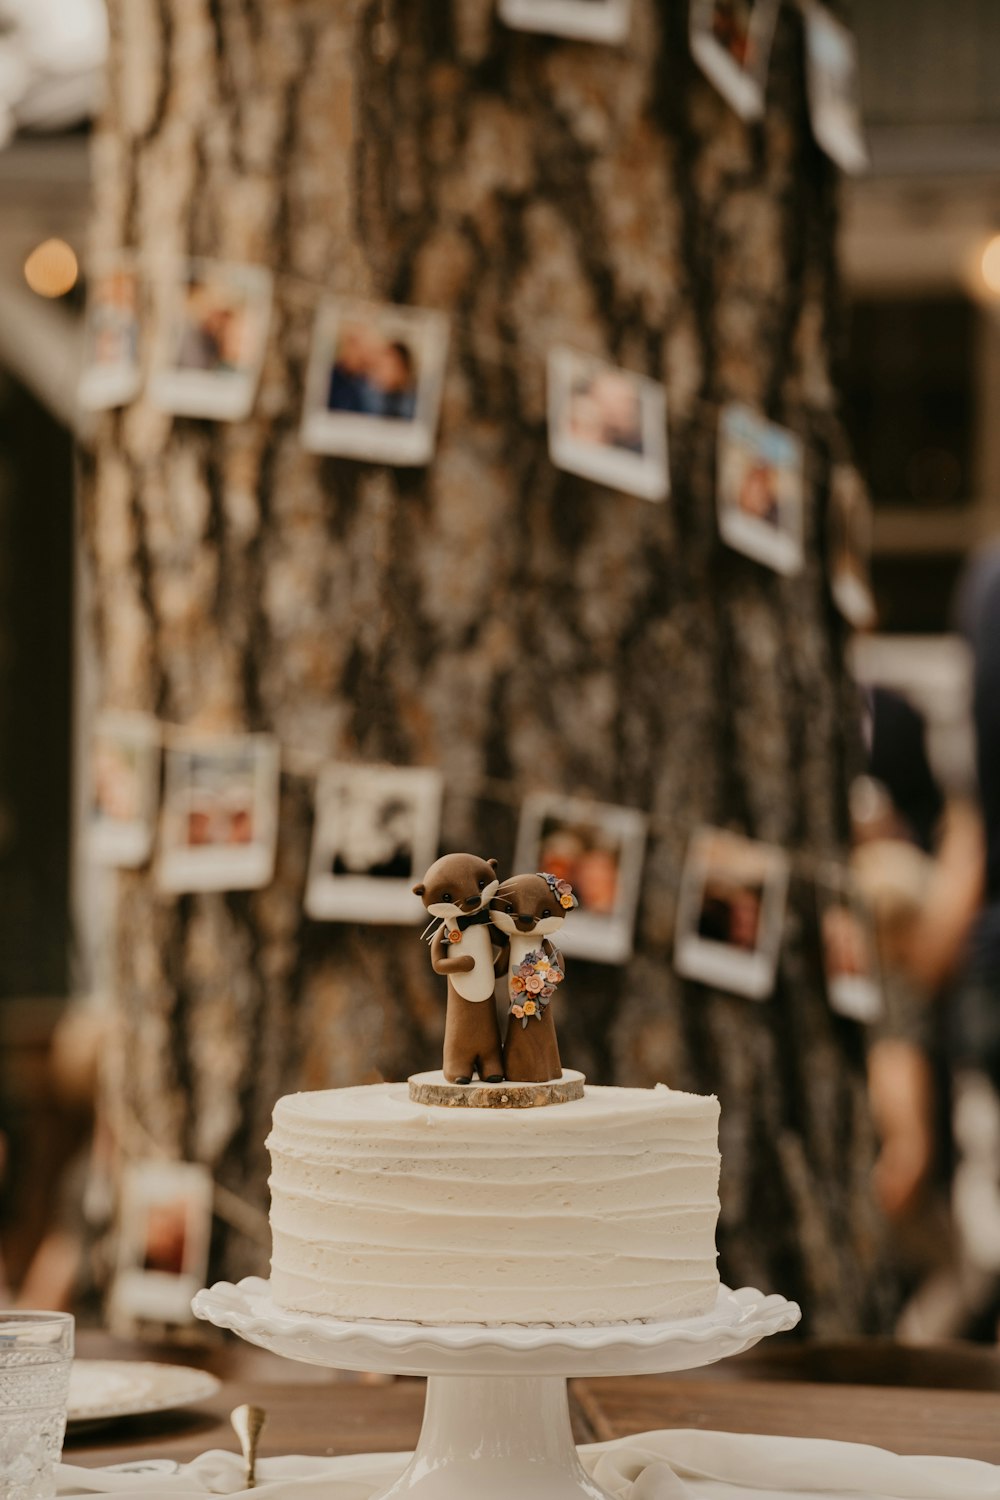 a wedding cake with a couple figurine on top of it